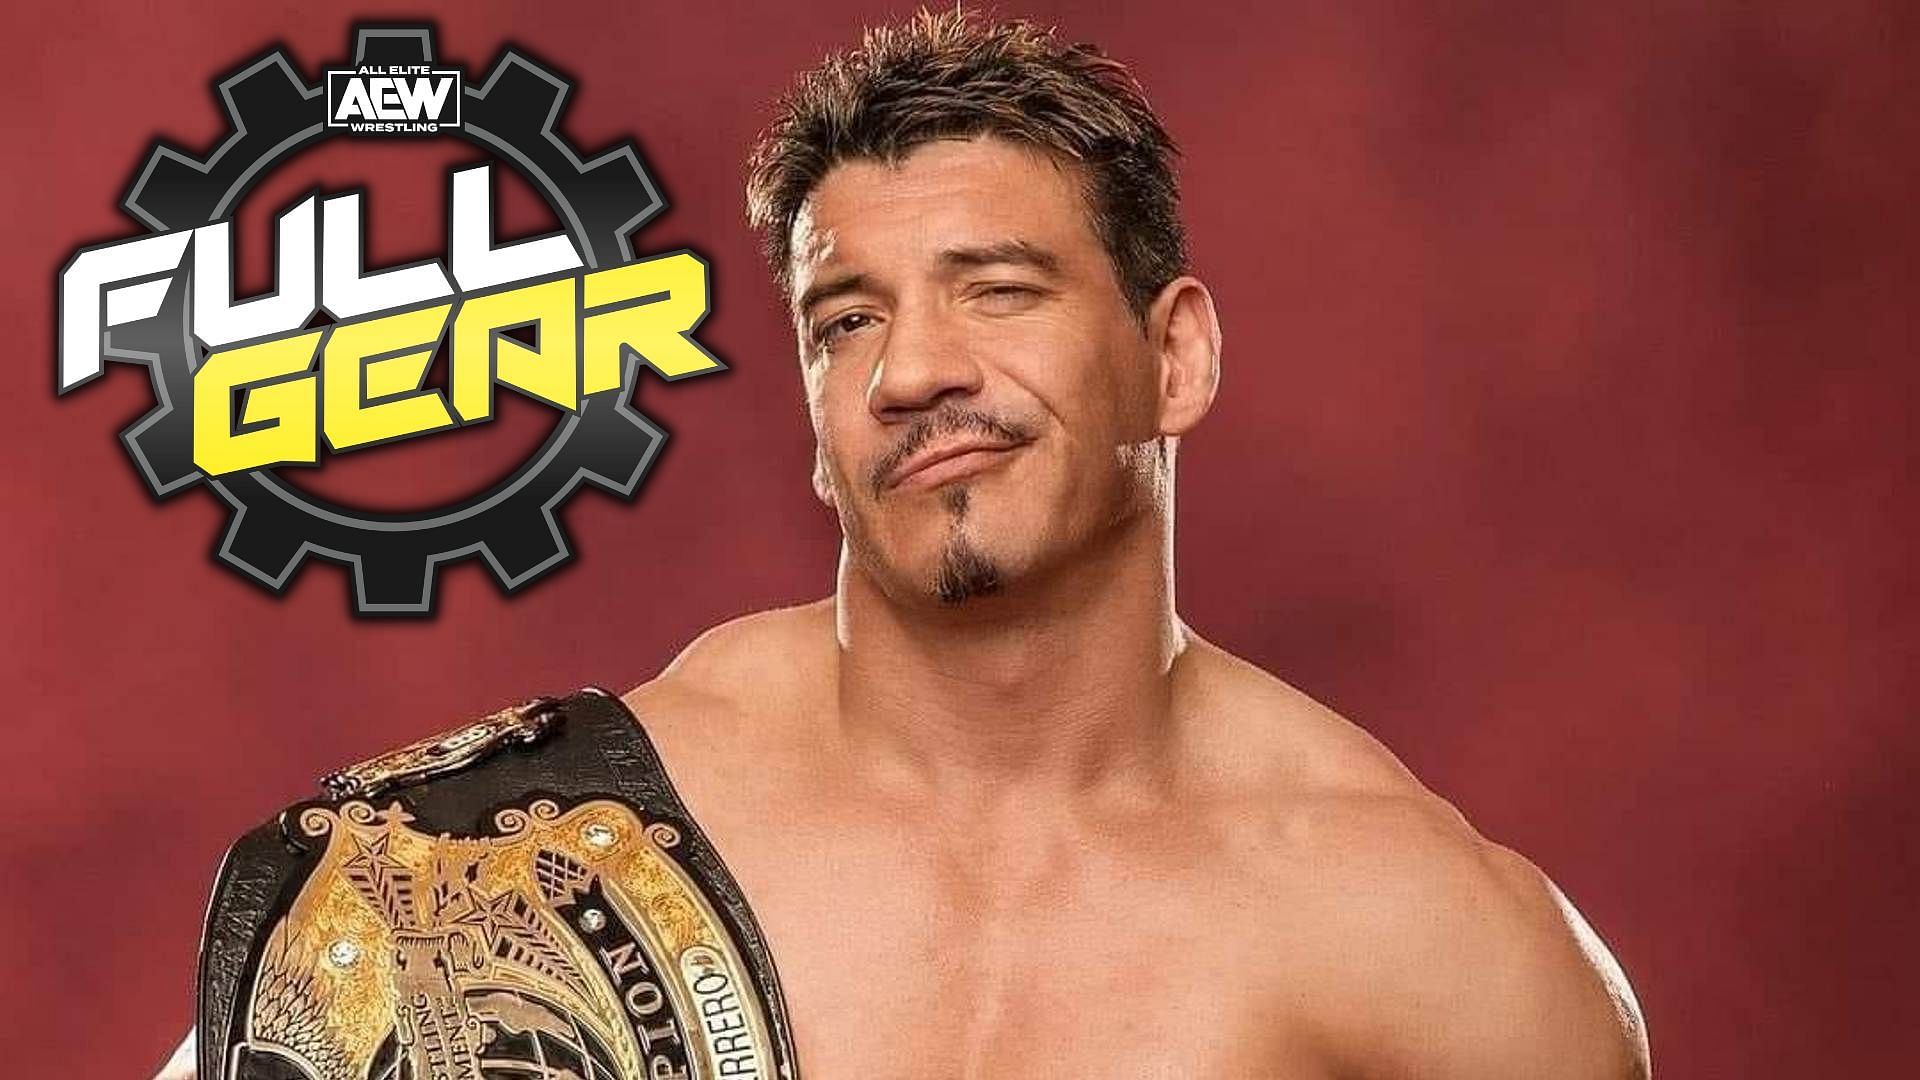 While Guerrero was never a part of AEW, the promotion continues to honor his memory.